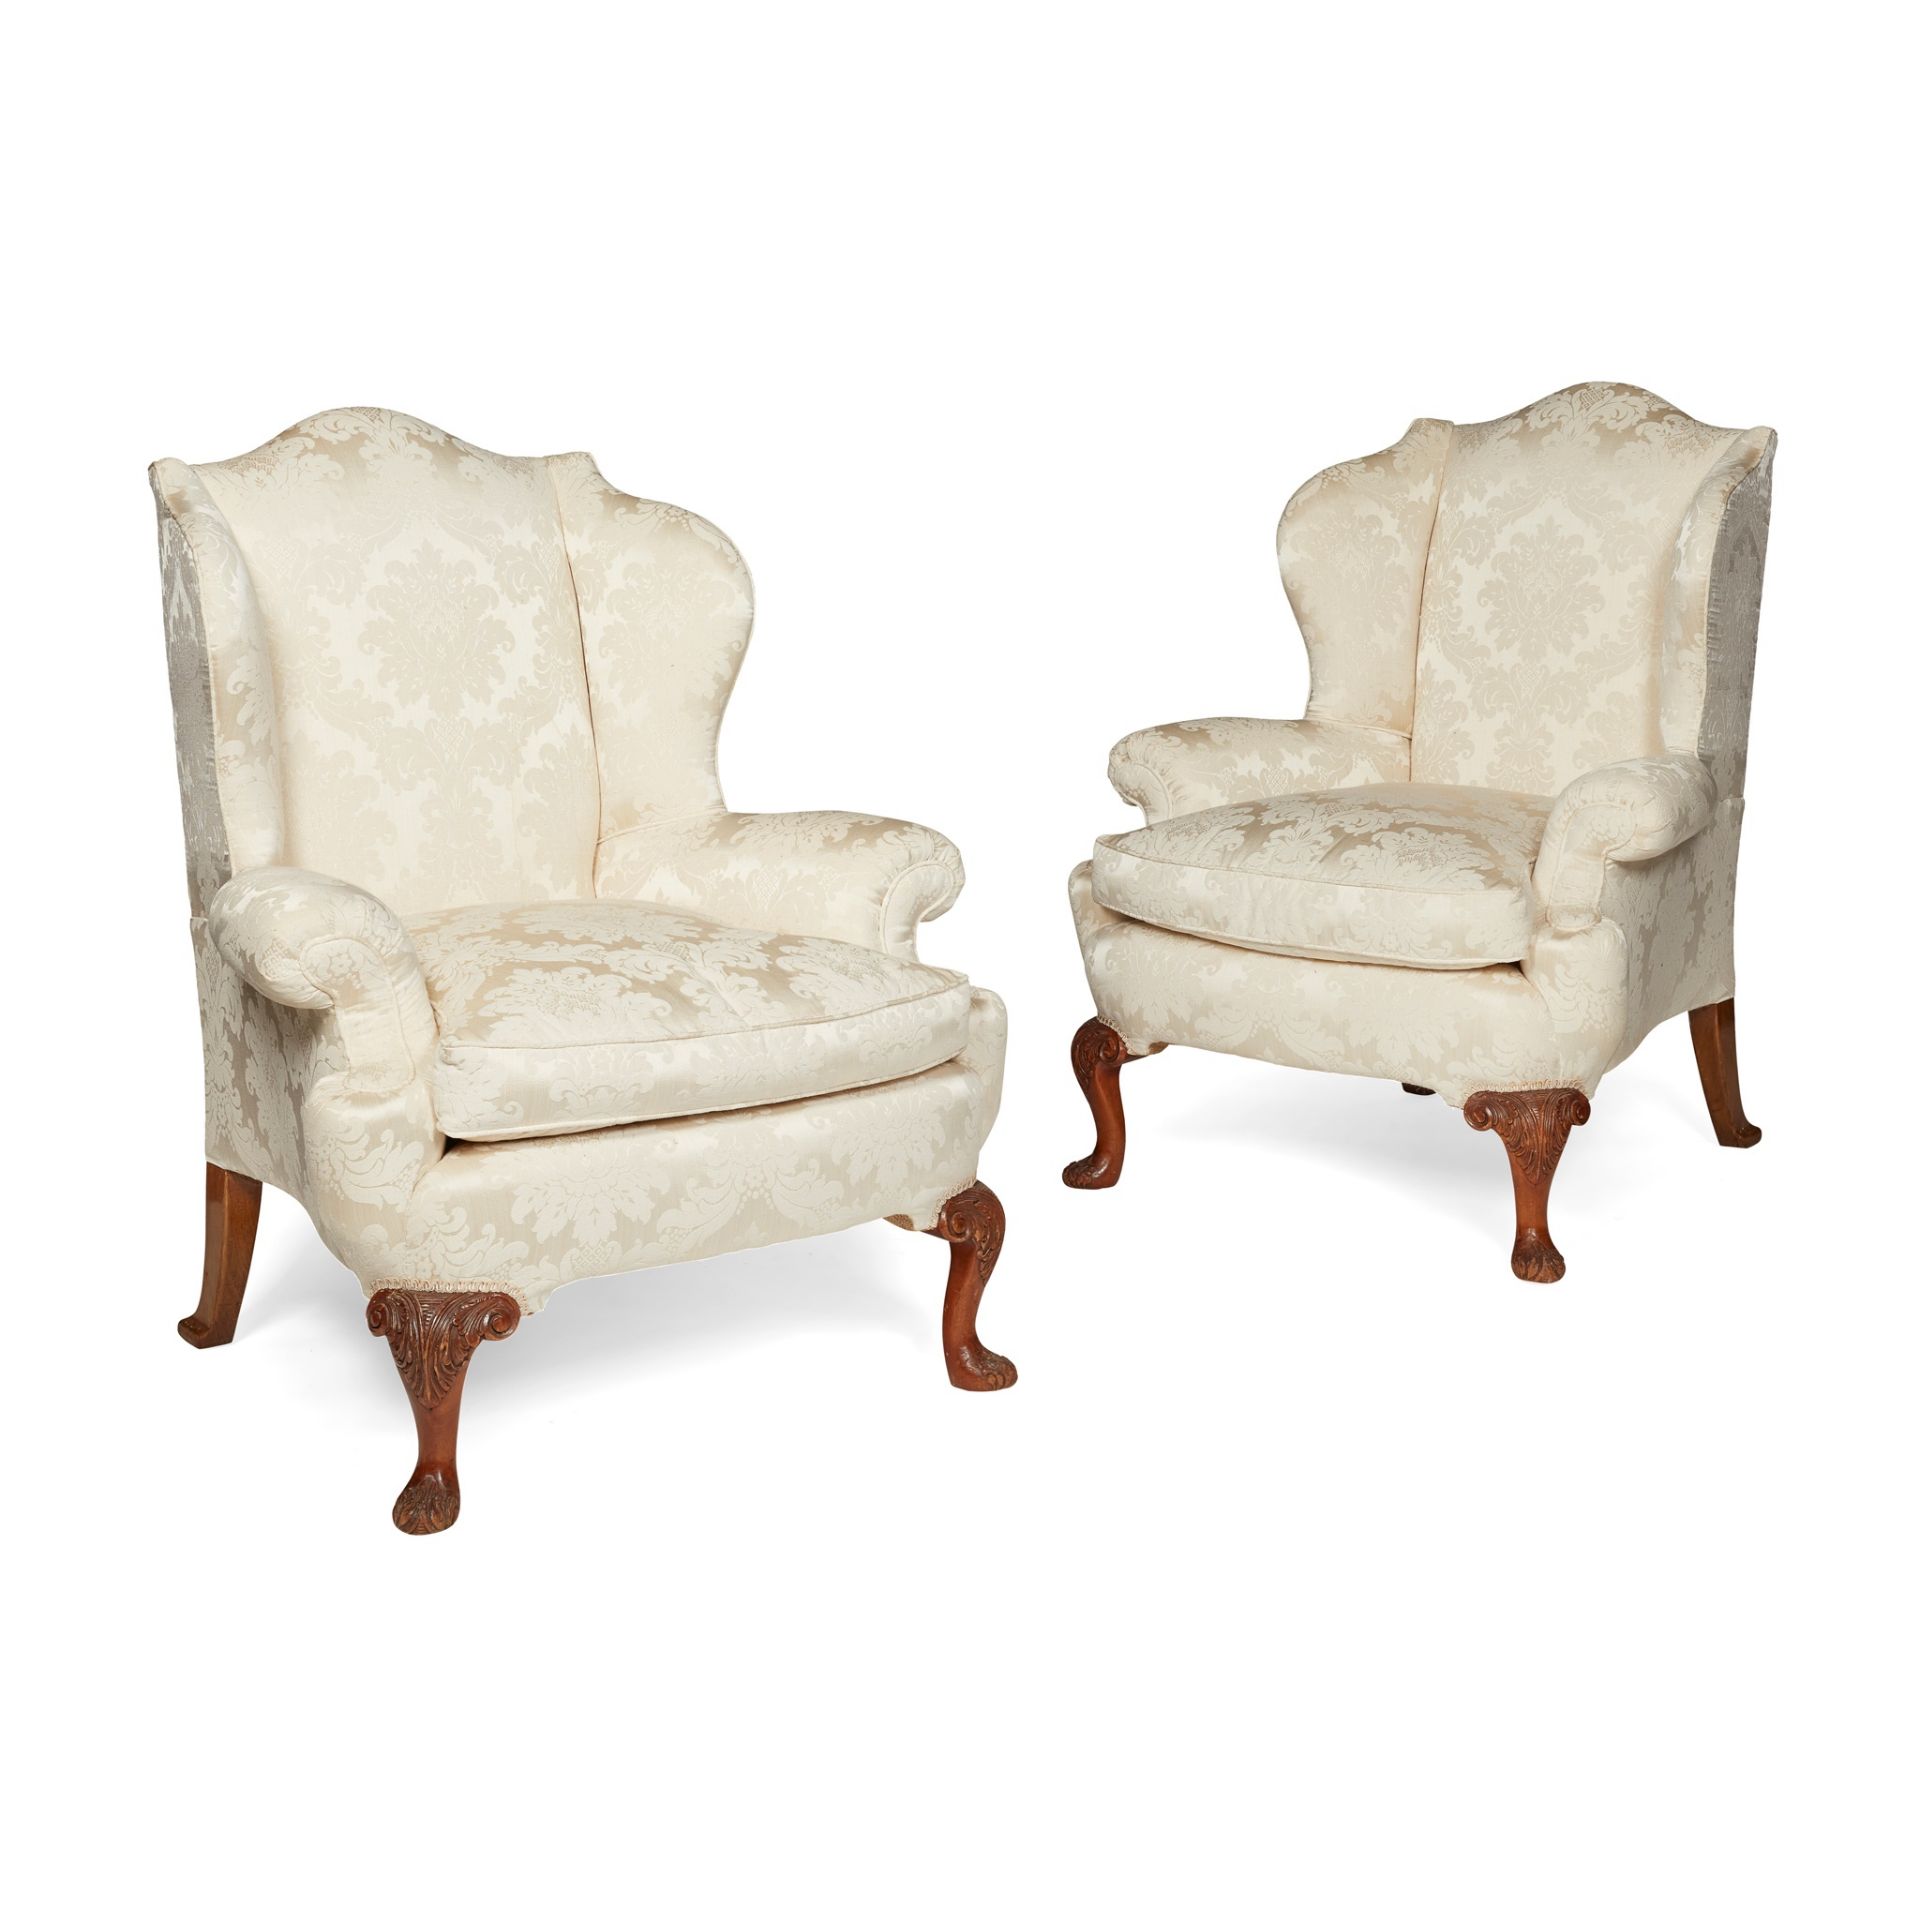 PAIR OF GEORGE II STYLE WING ARMCHAIRS 20TH CENTURY